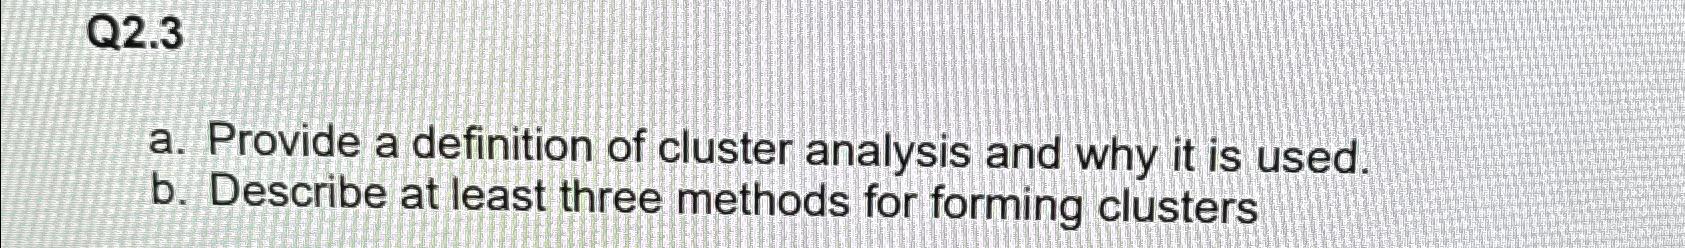 Solved Q2.3a. ﻿Provide a definition of cluster analysis and